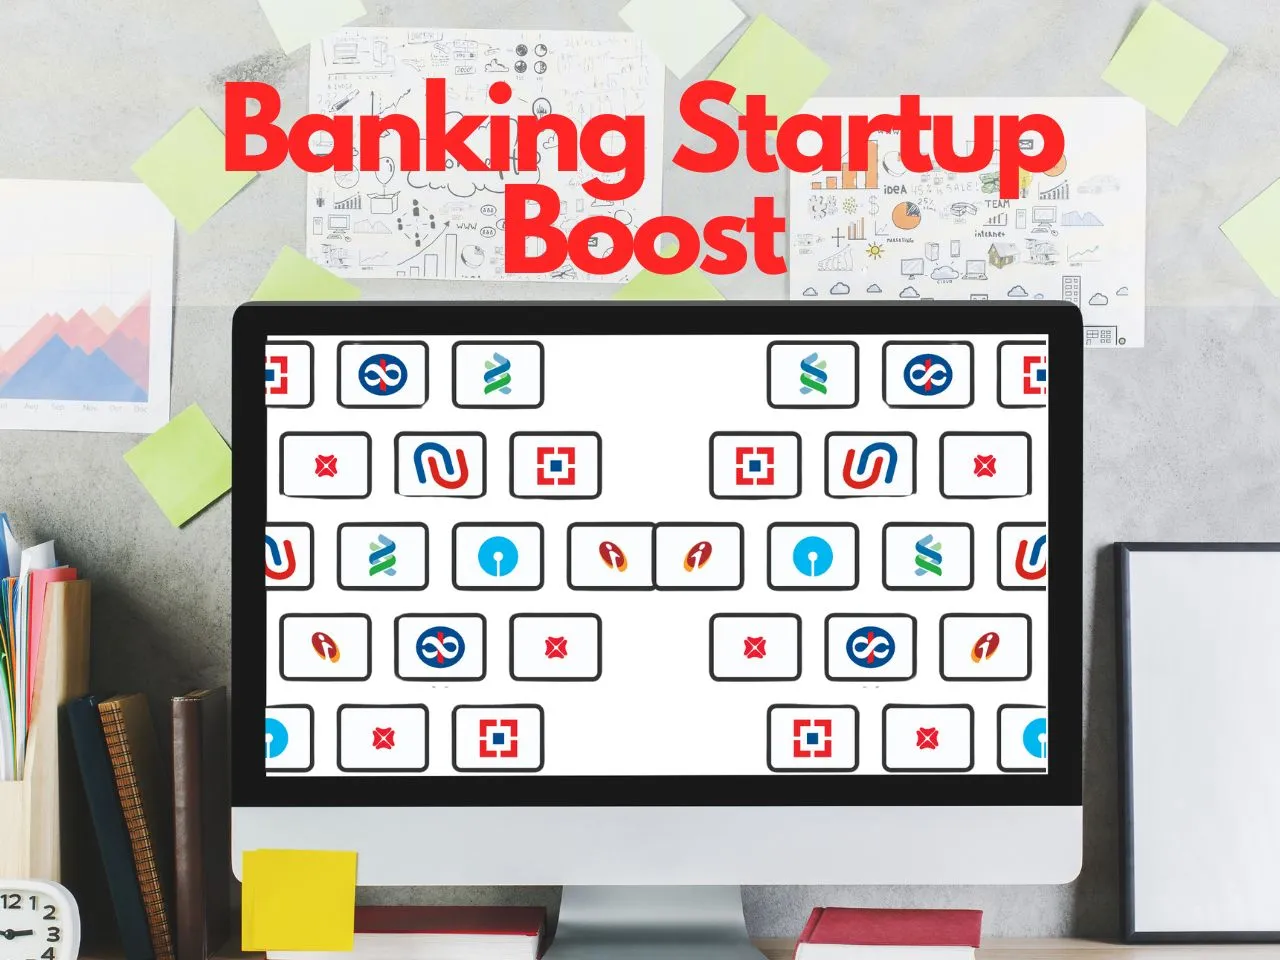 Banking Startup Boost